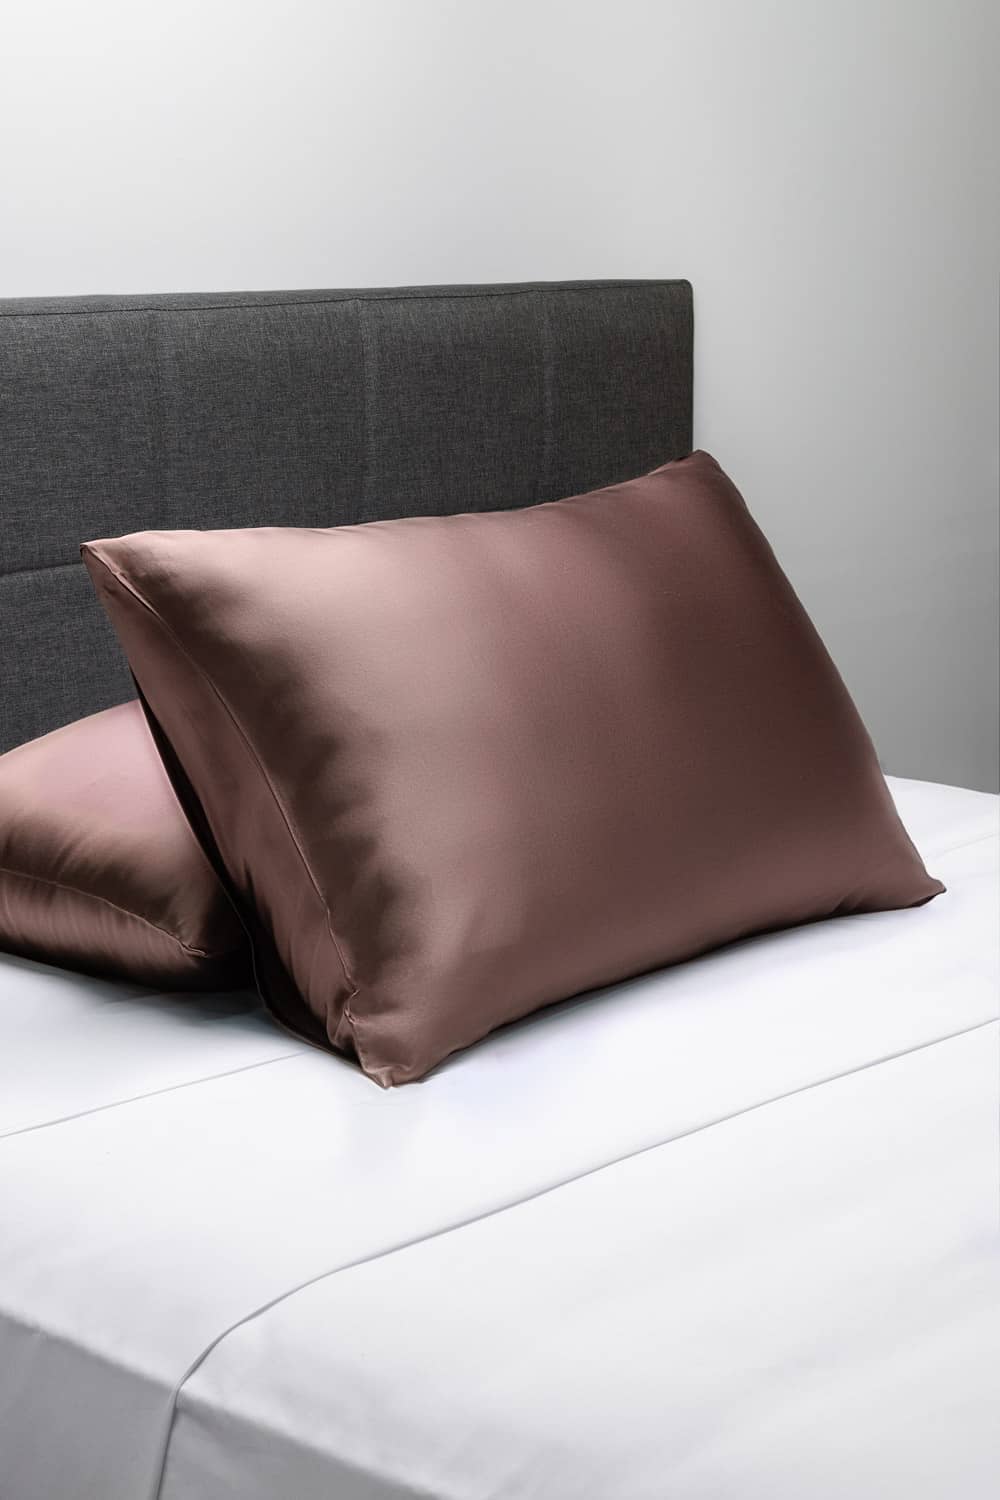 25 Momme 100% Pure Mulberry Silk Pillowcase - Good Housekeeping "All-Star Standout" Home>Bedding>Pillowcase Fishers Finery Chocolate Standard Single